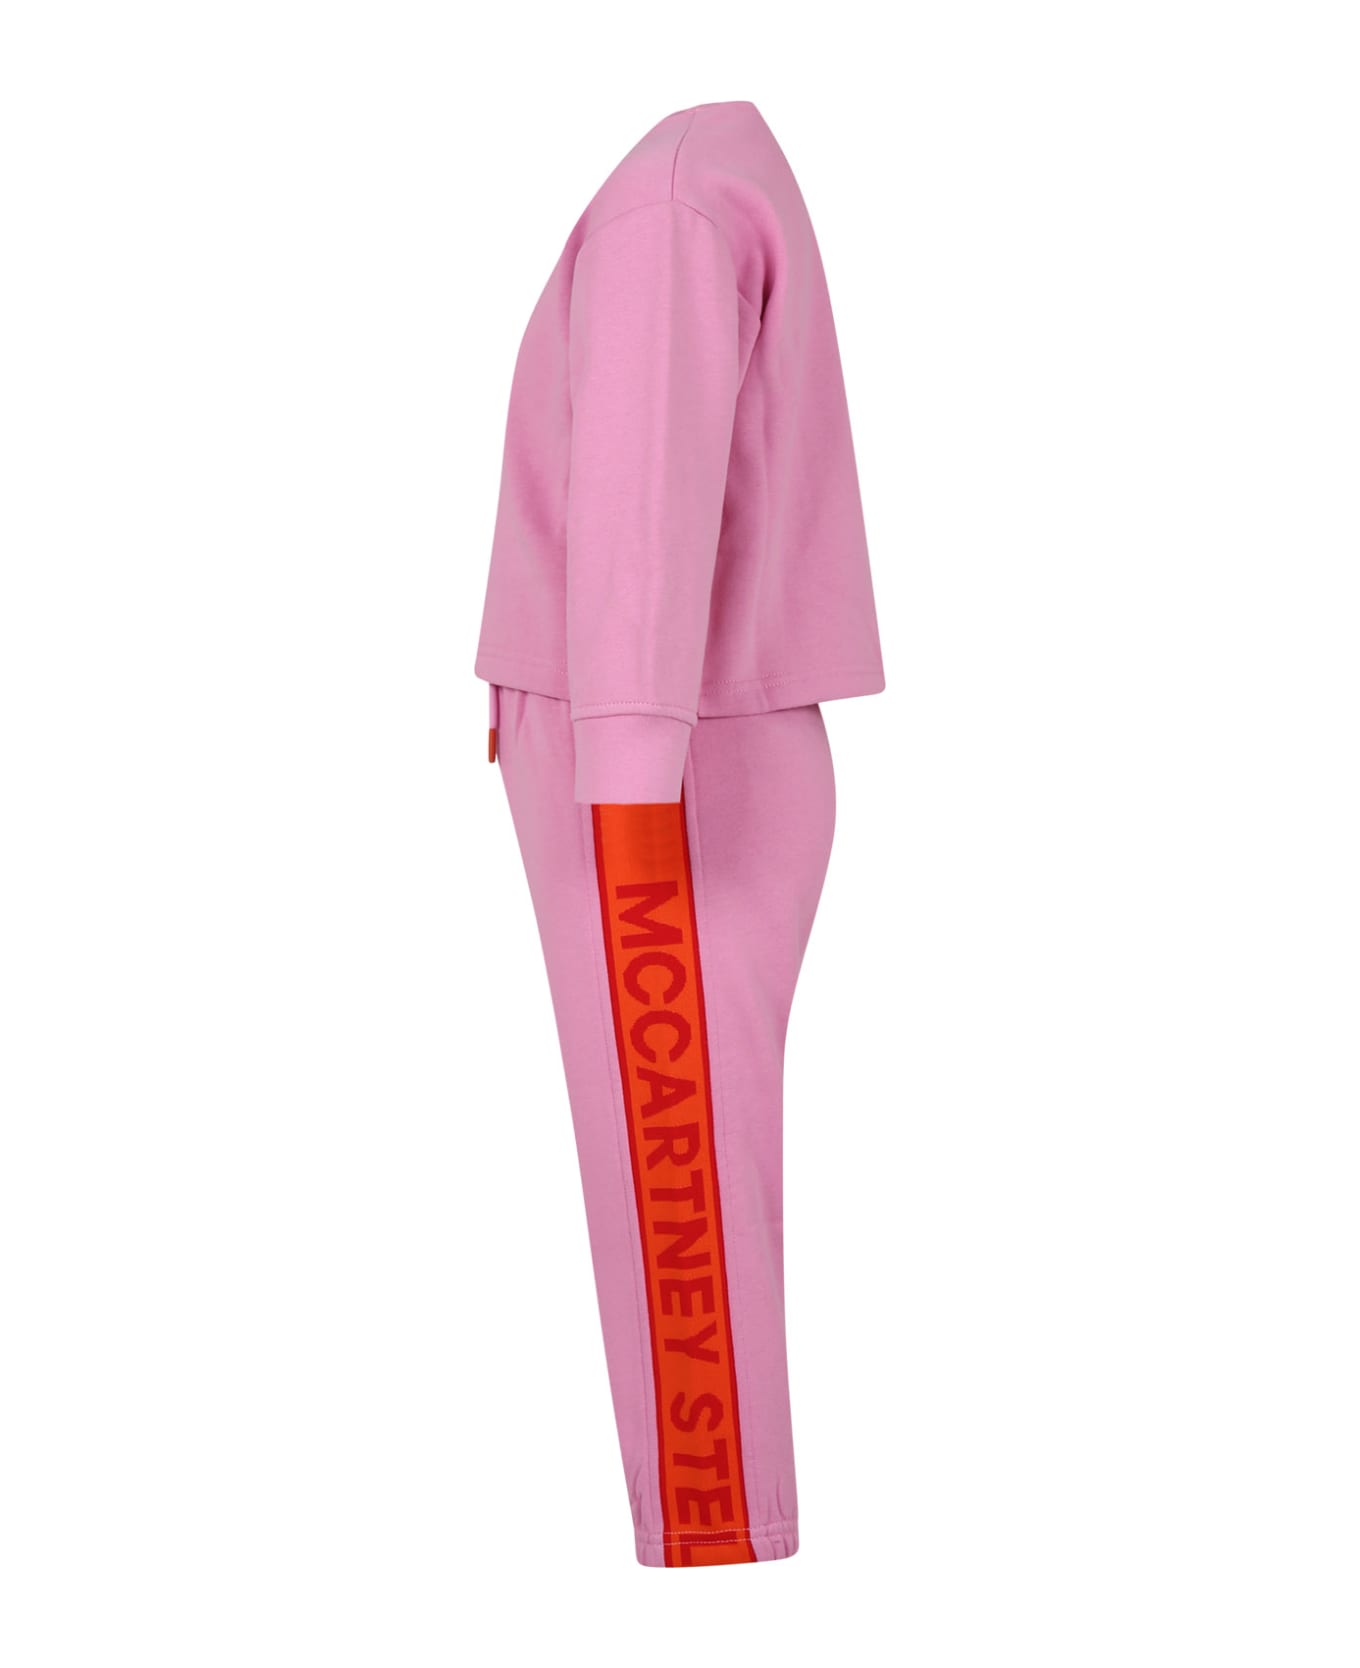 Stella McCartney Kids Pink Outfit For Girl With Logo - Pink ジャンプスーツ